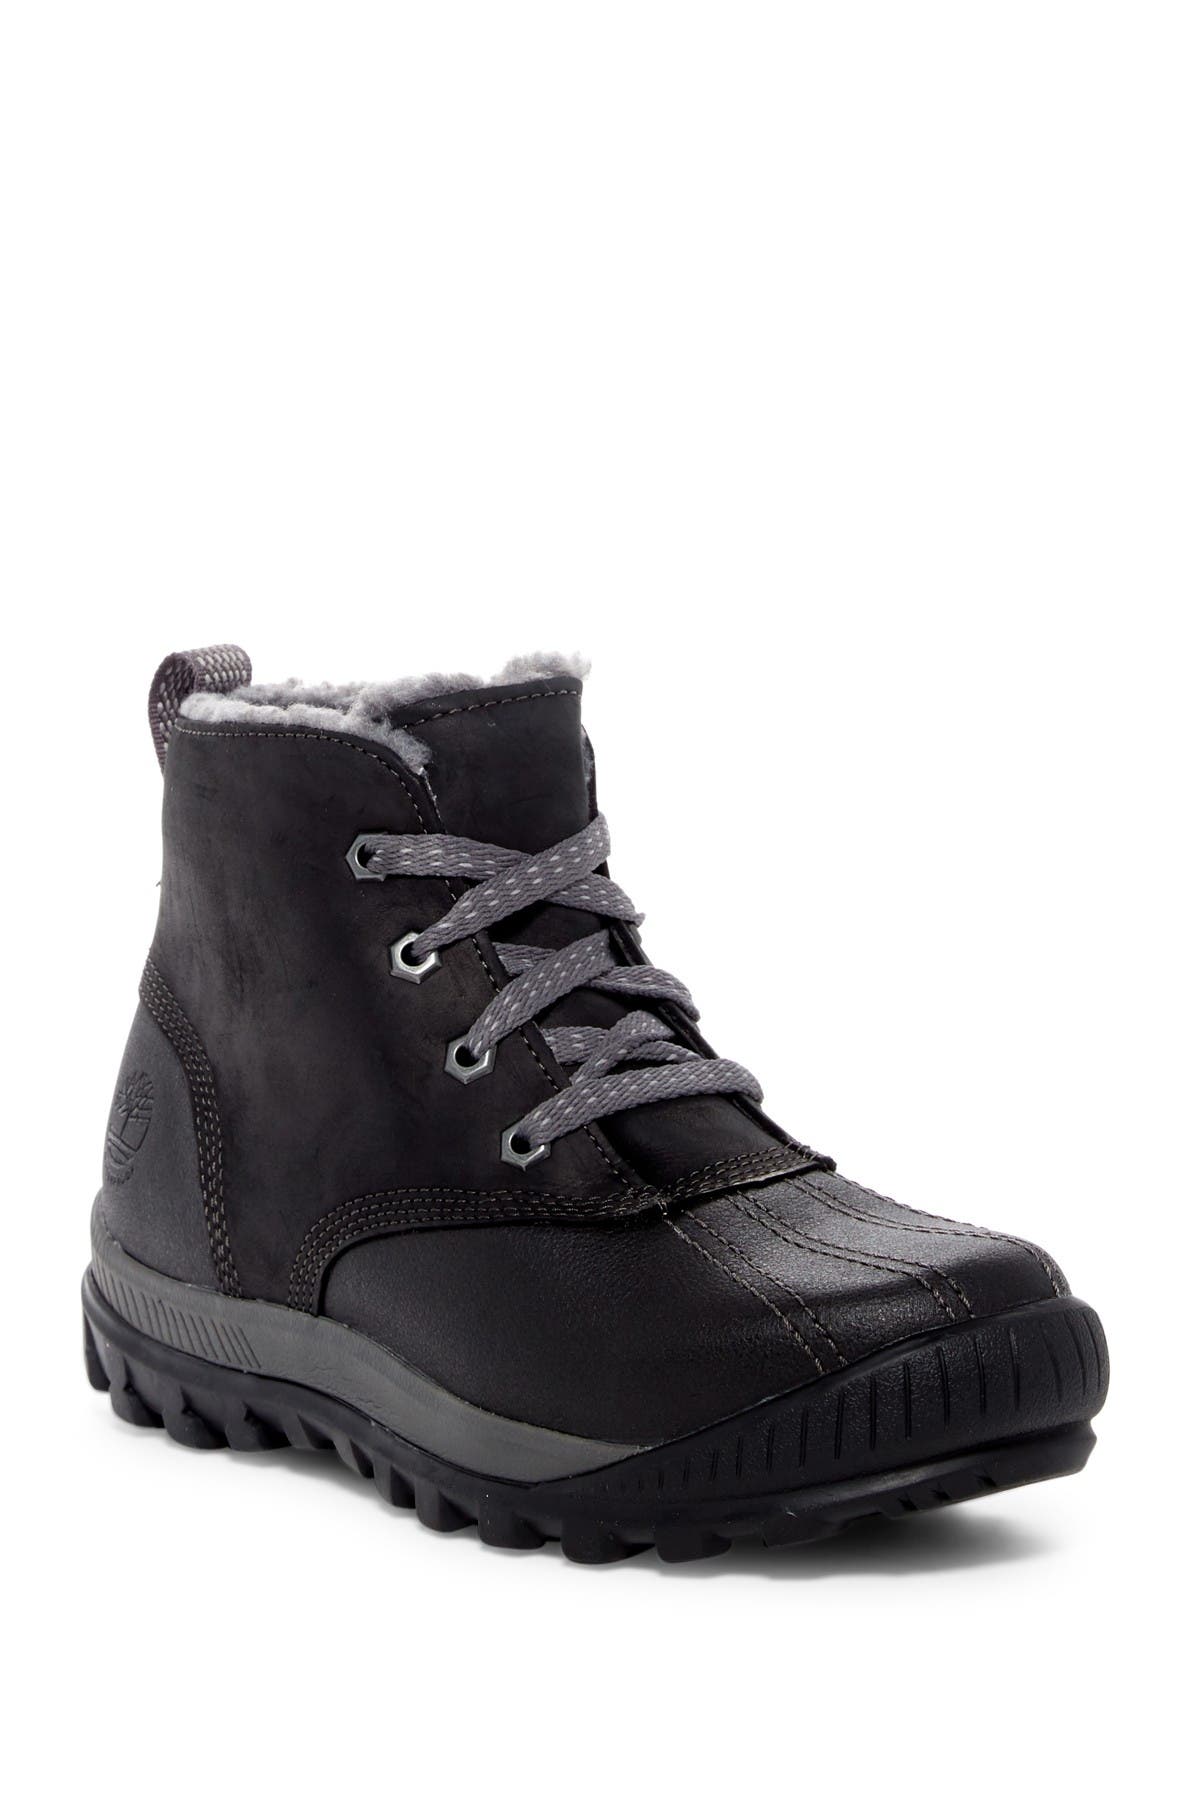 timberland mt hayes boots